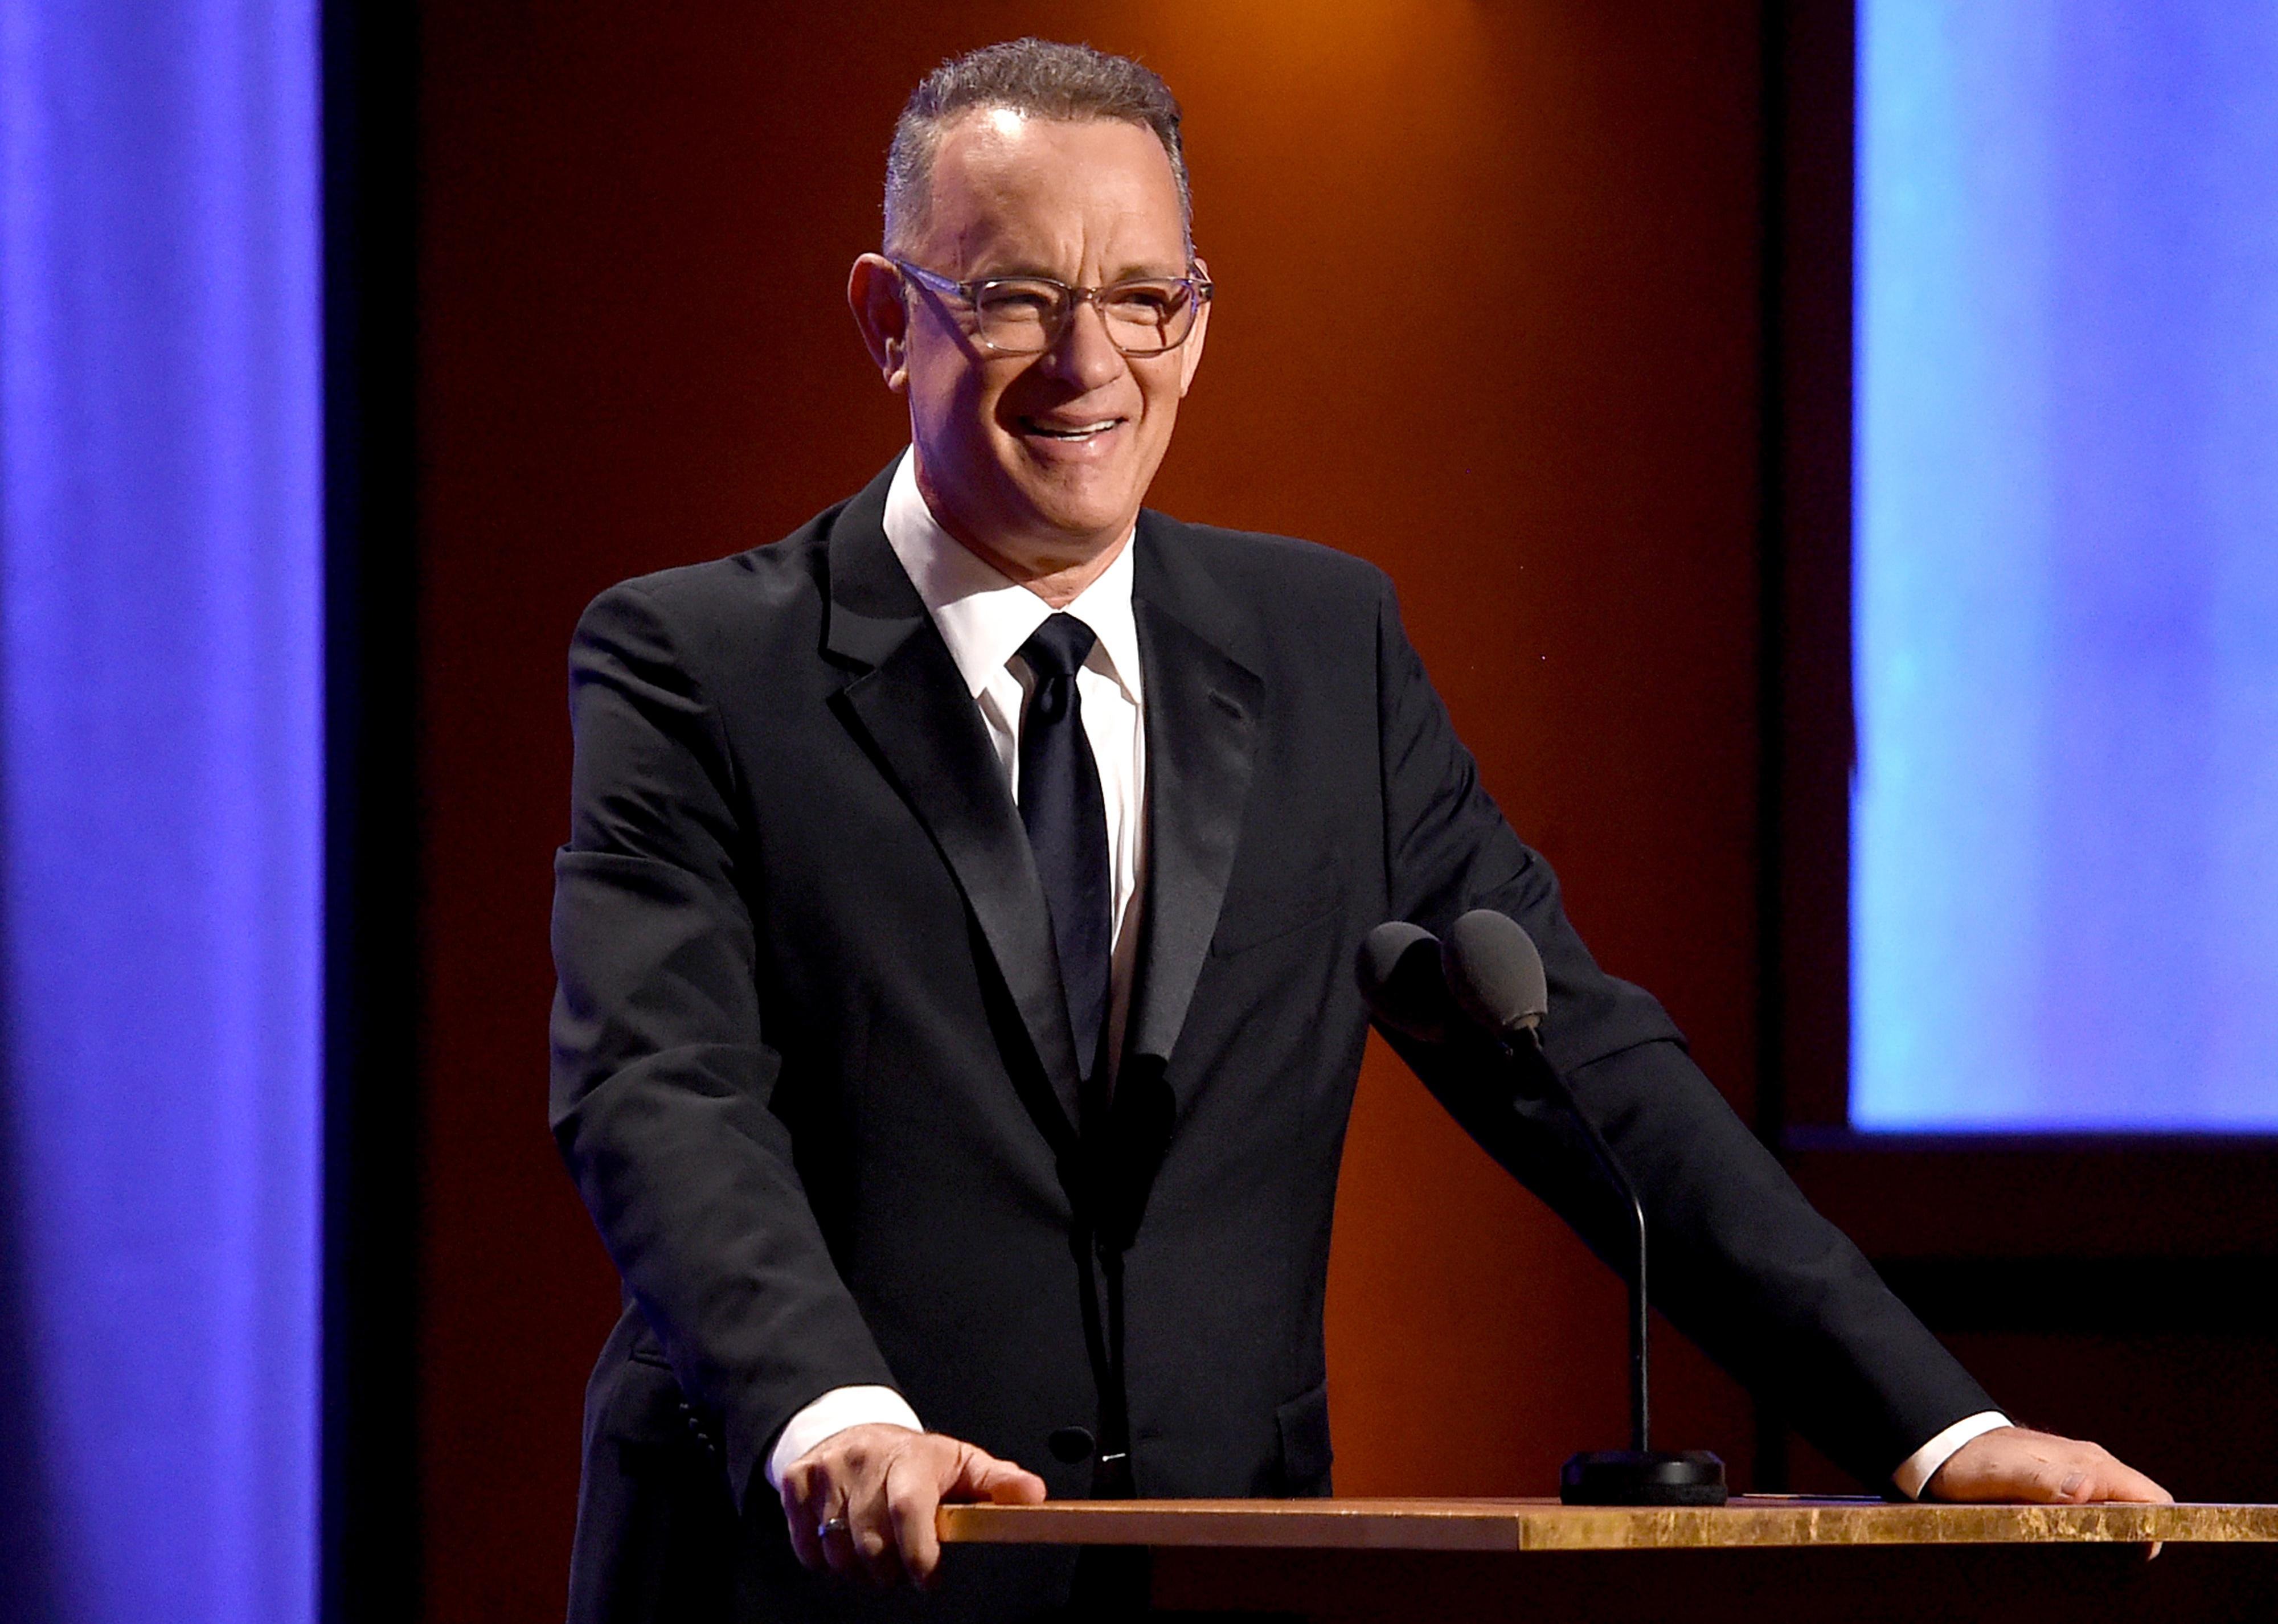 Tom Hanks in a black suit and tie onstage at a podium.